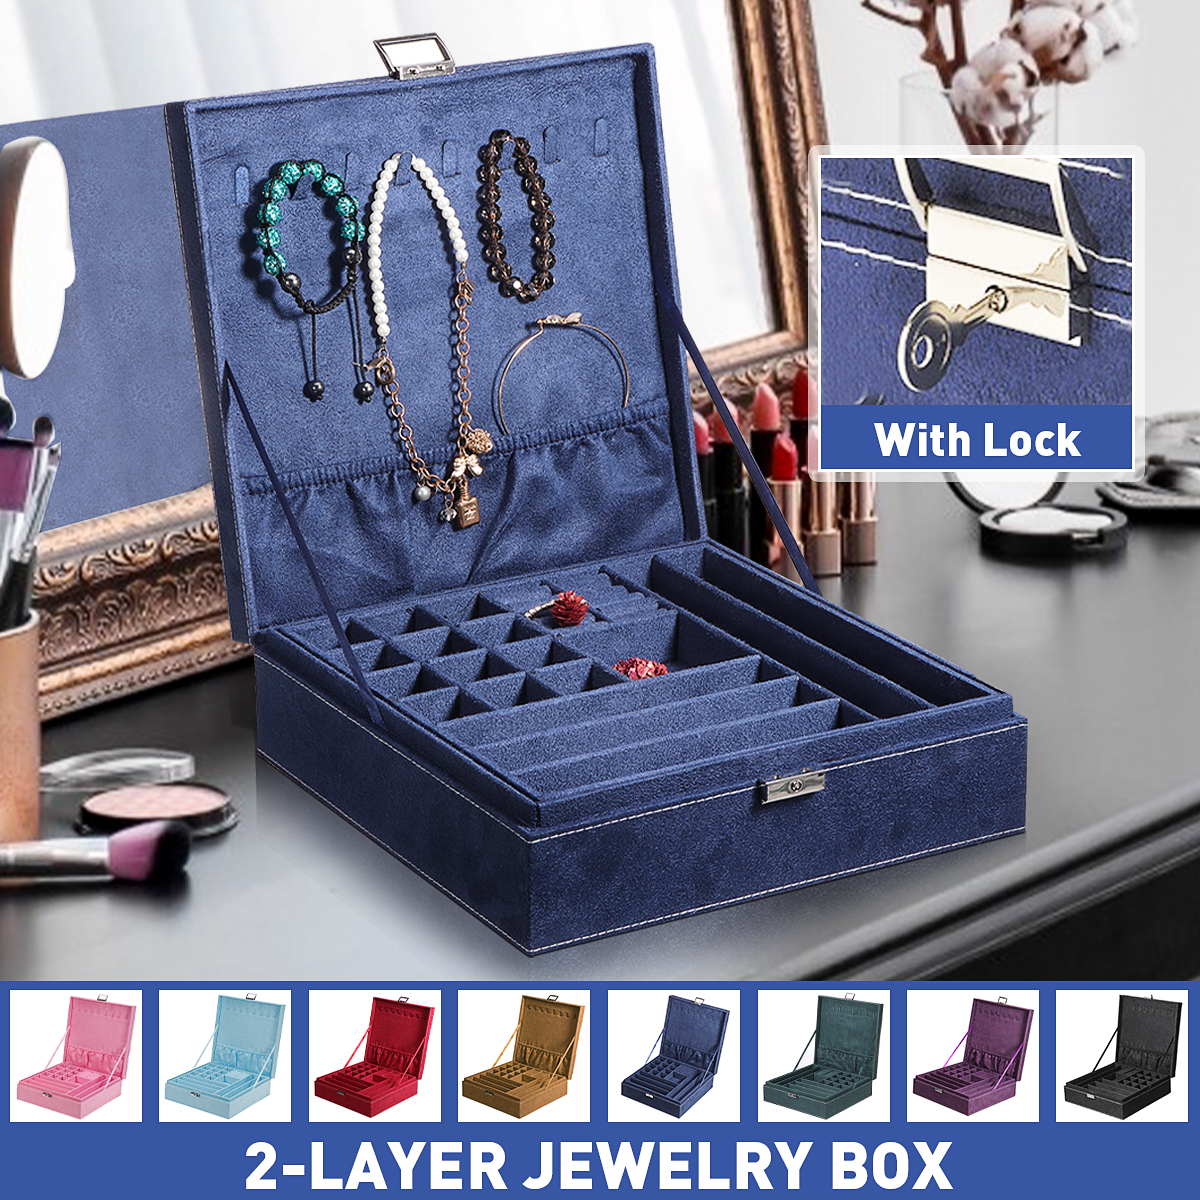 Multi-function-Vintage-Jewelry-Box-Organizers-Two-layer-Lockable-Jewelry-Display-Storage-Case-1855370-1